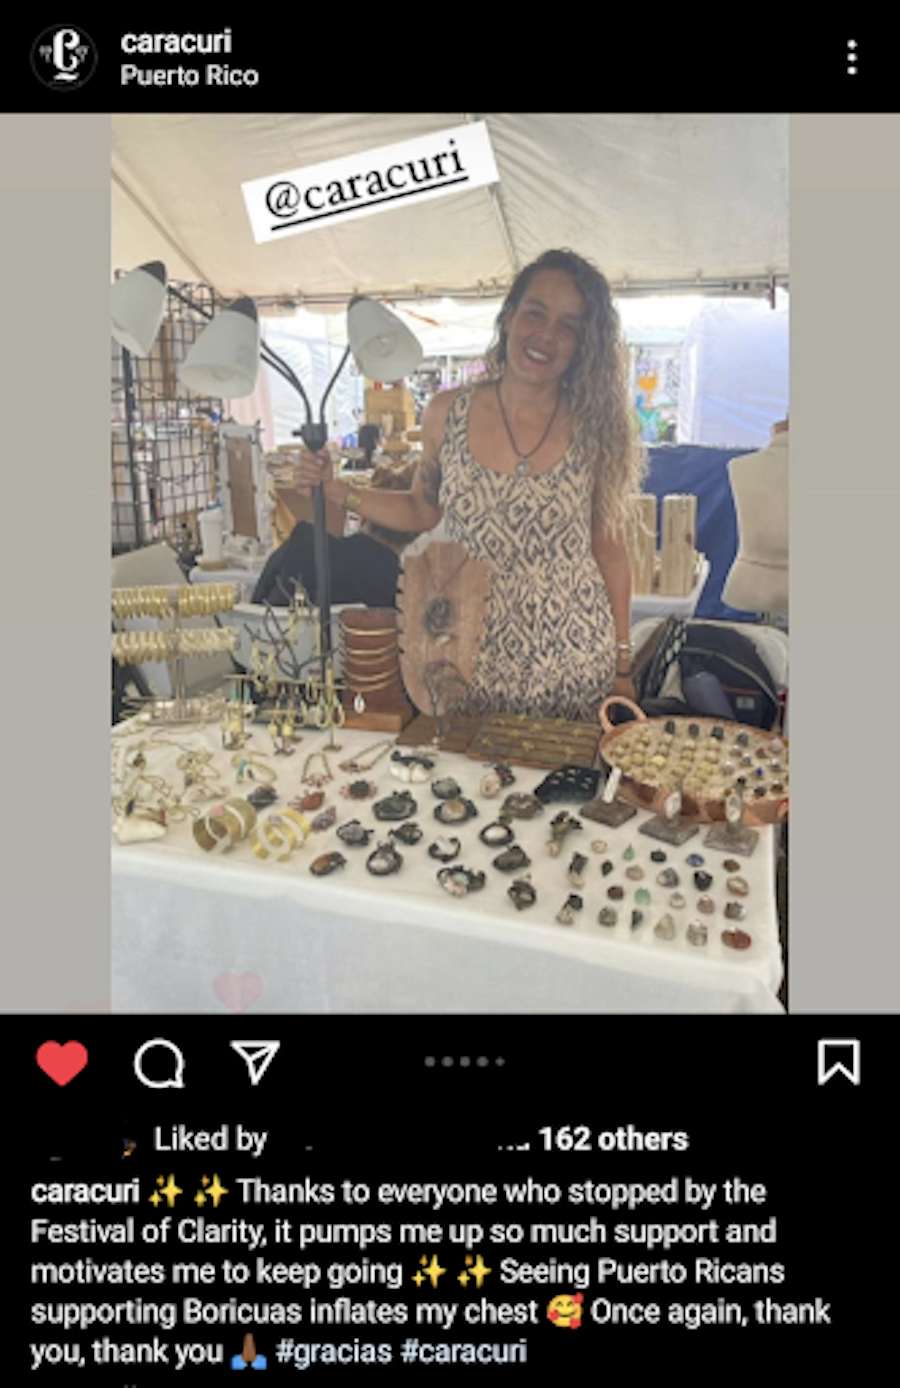 Instagram post featuring Caracuri jewelers at a local festival.